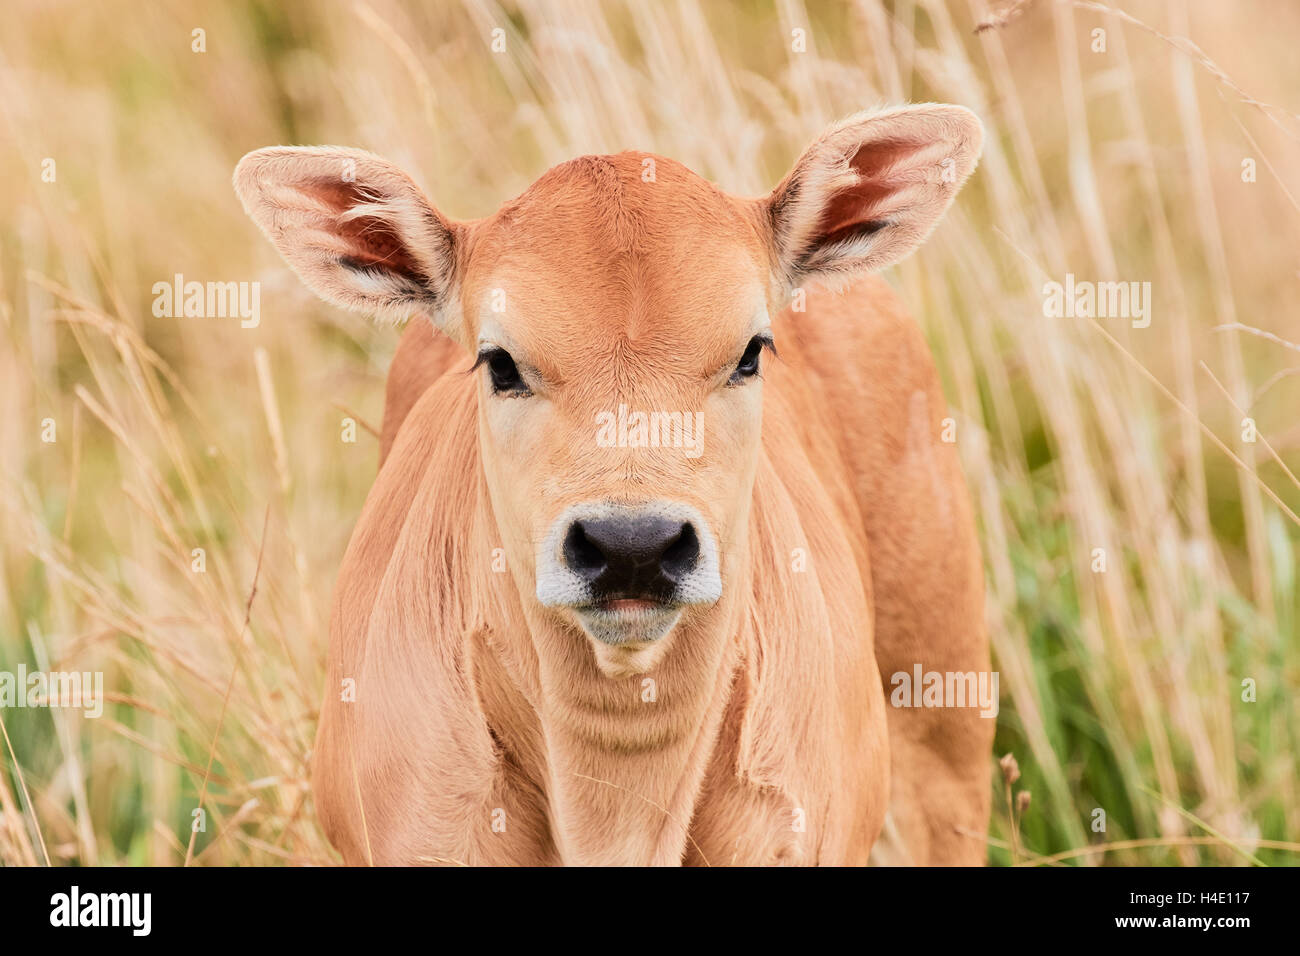 Curious calf coming out of the tall grass Stock Photo